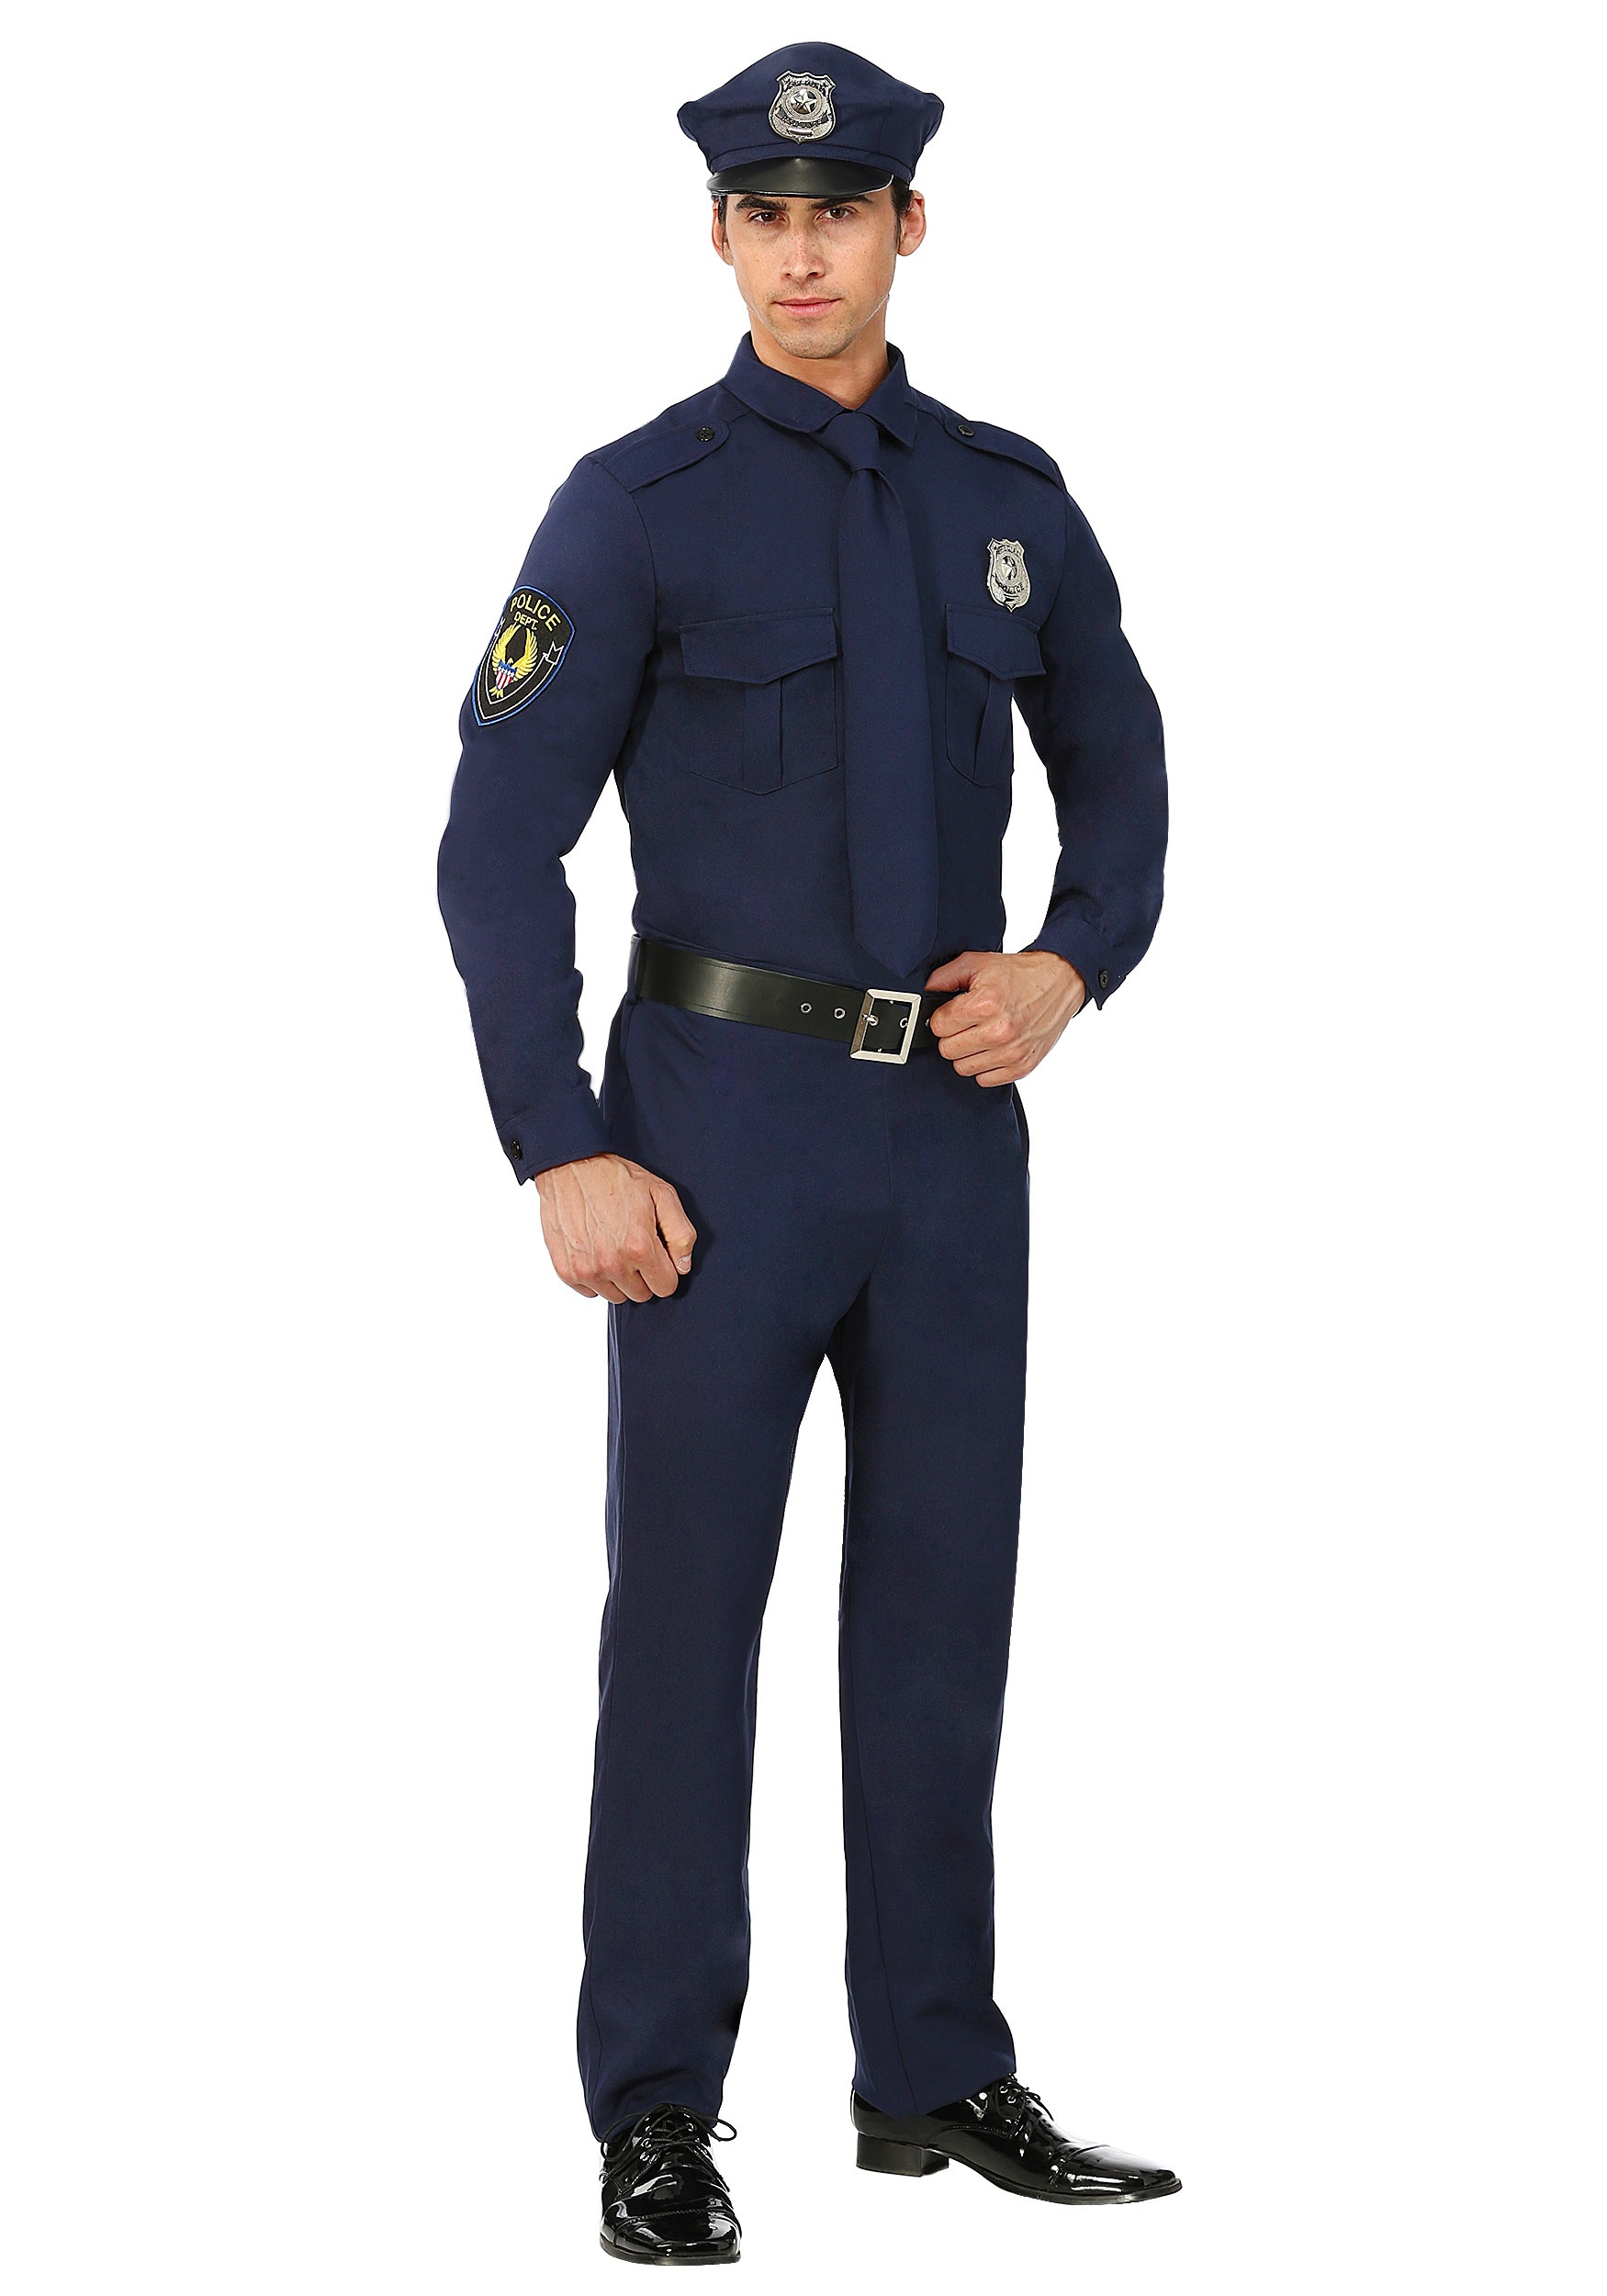 Plus Size Cop Costume For Men , Police Officer Costume